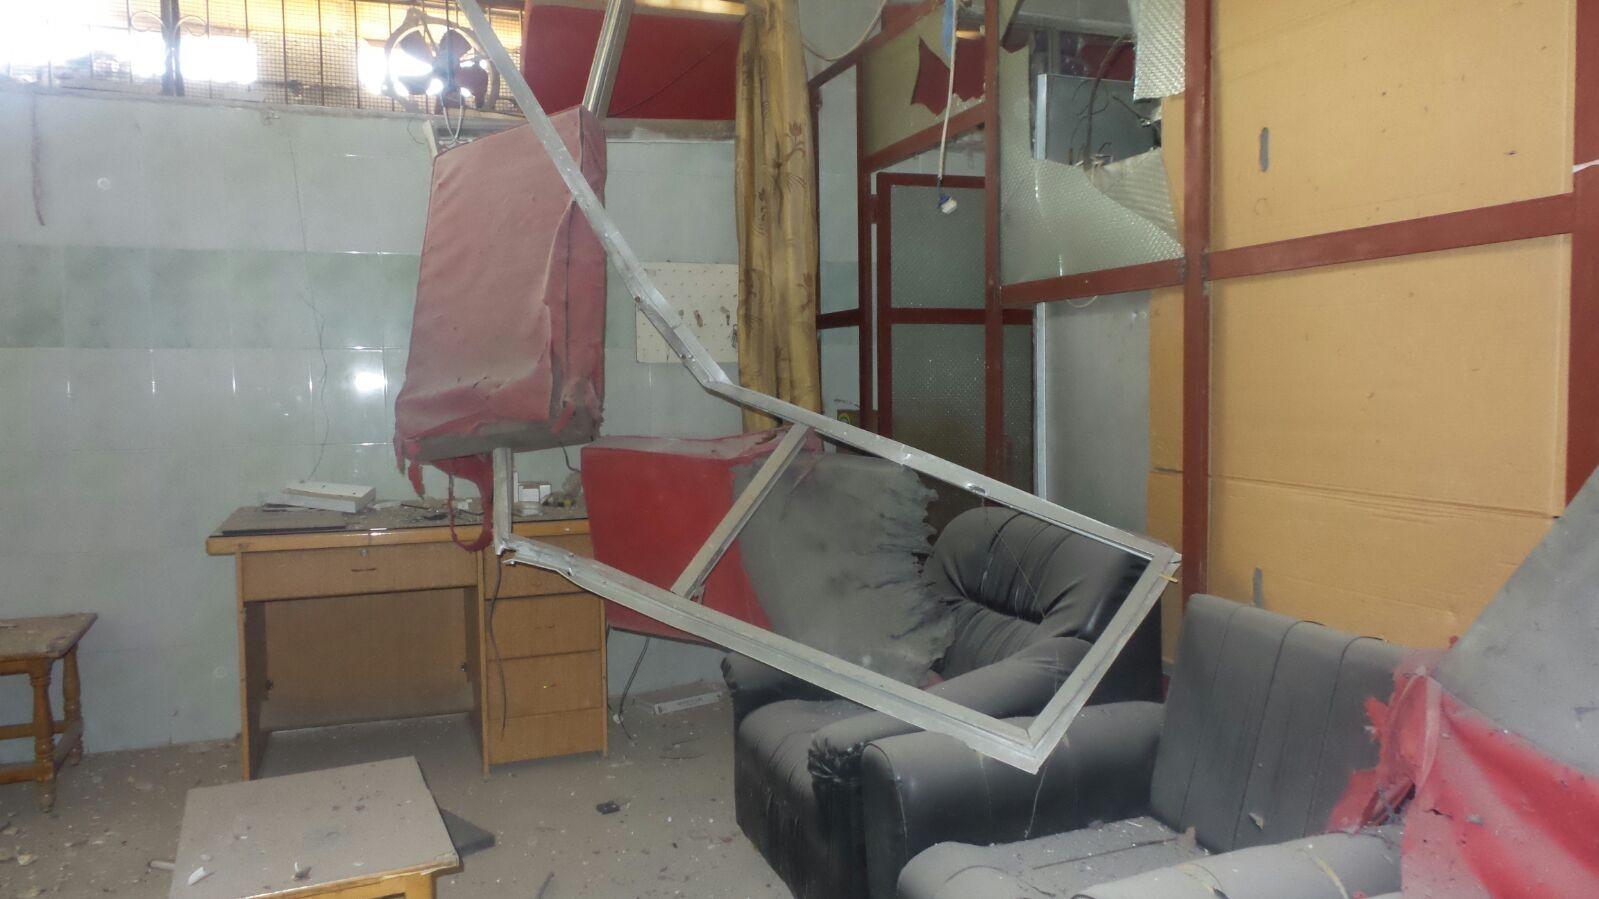 syria_msf-supported_hospital